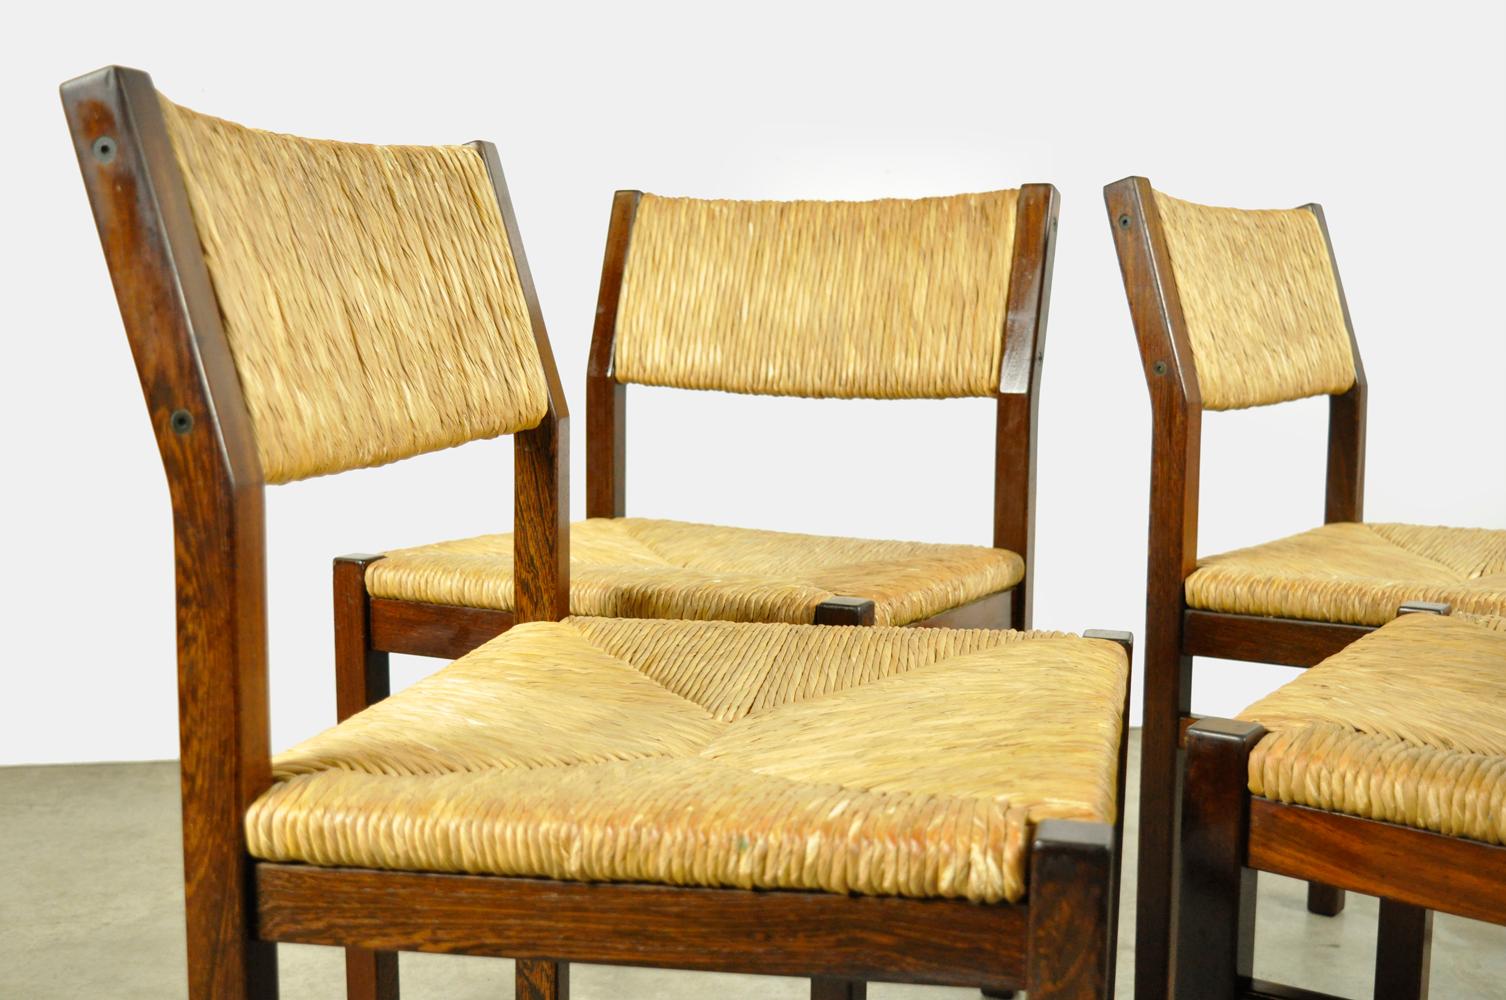 Woven Set of 4 vintage dining chairs with reed seat by Pastoe, 1970s Netherlands For Sale